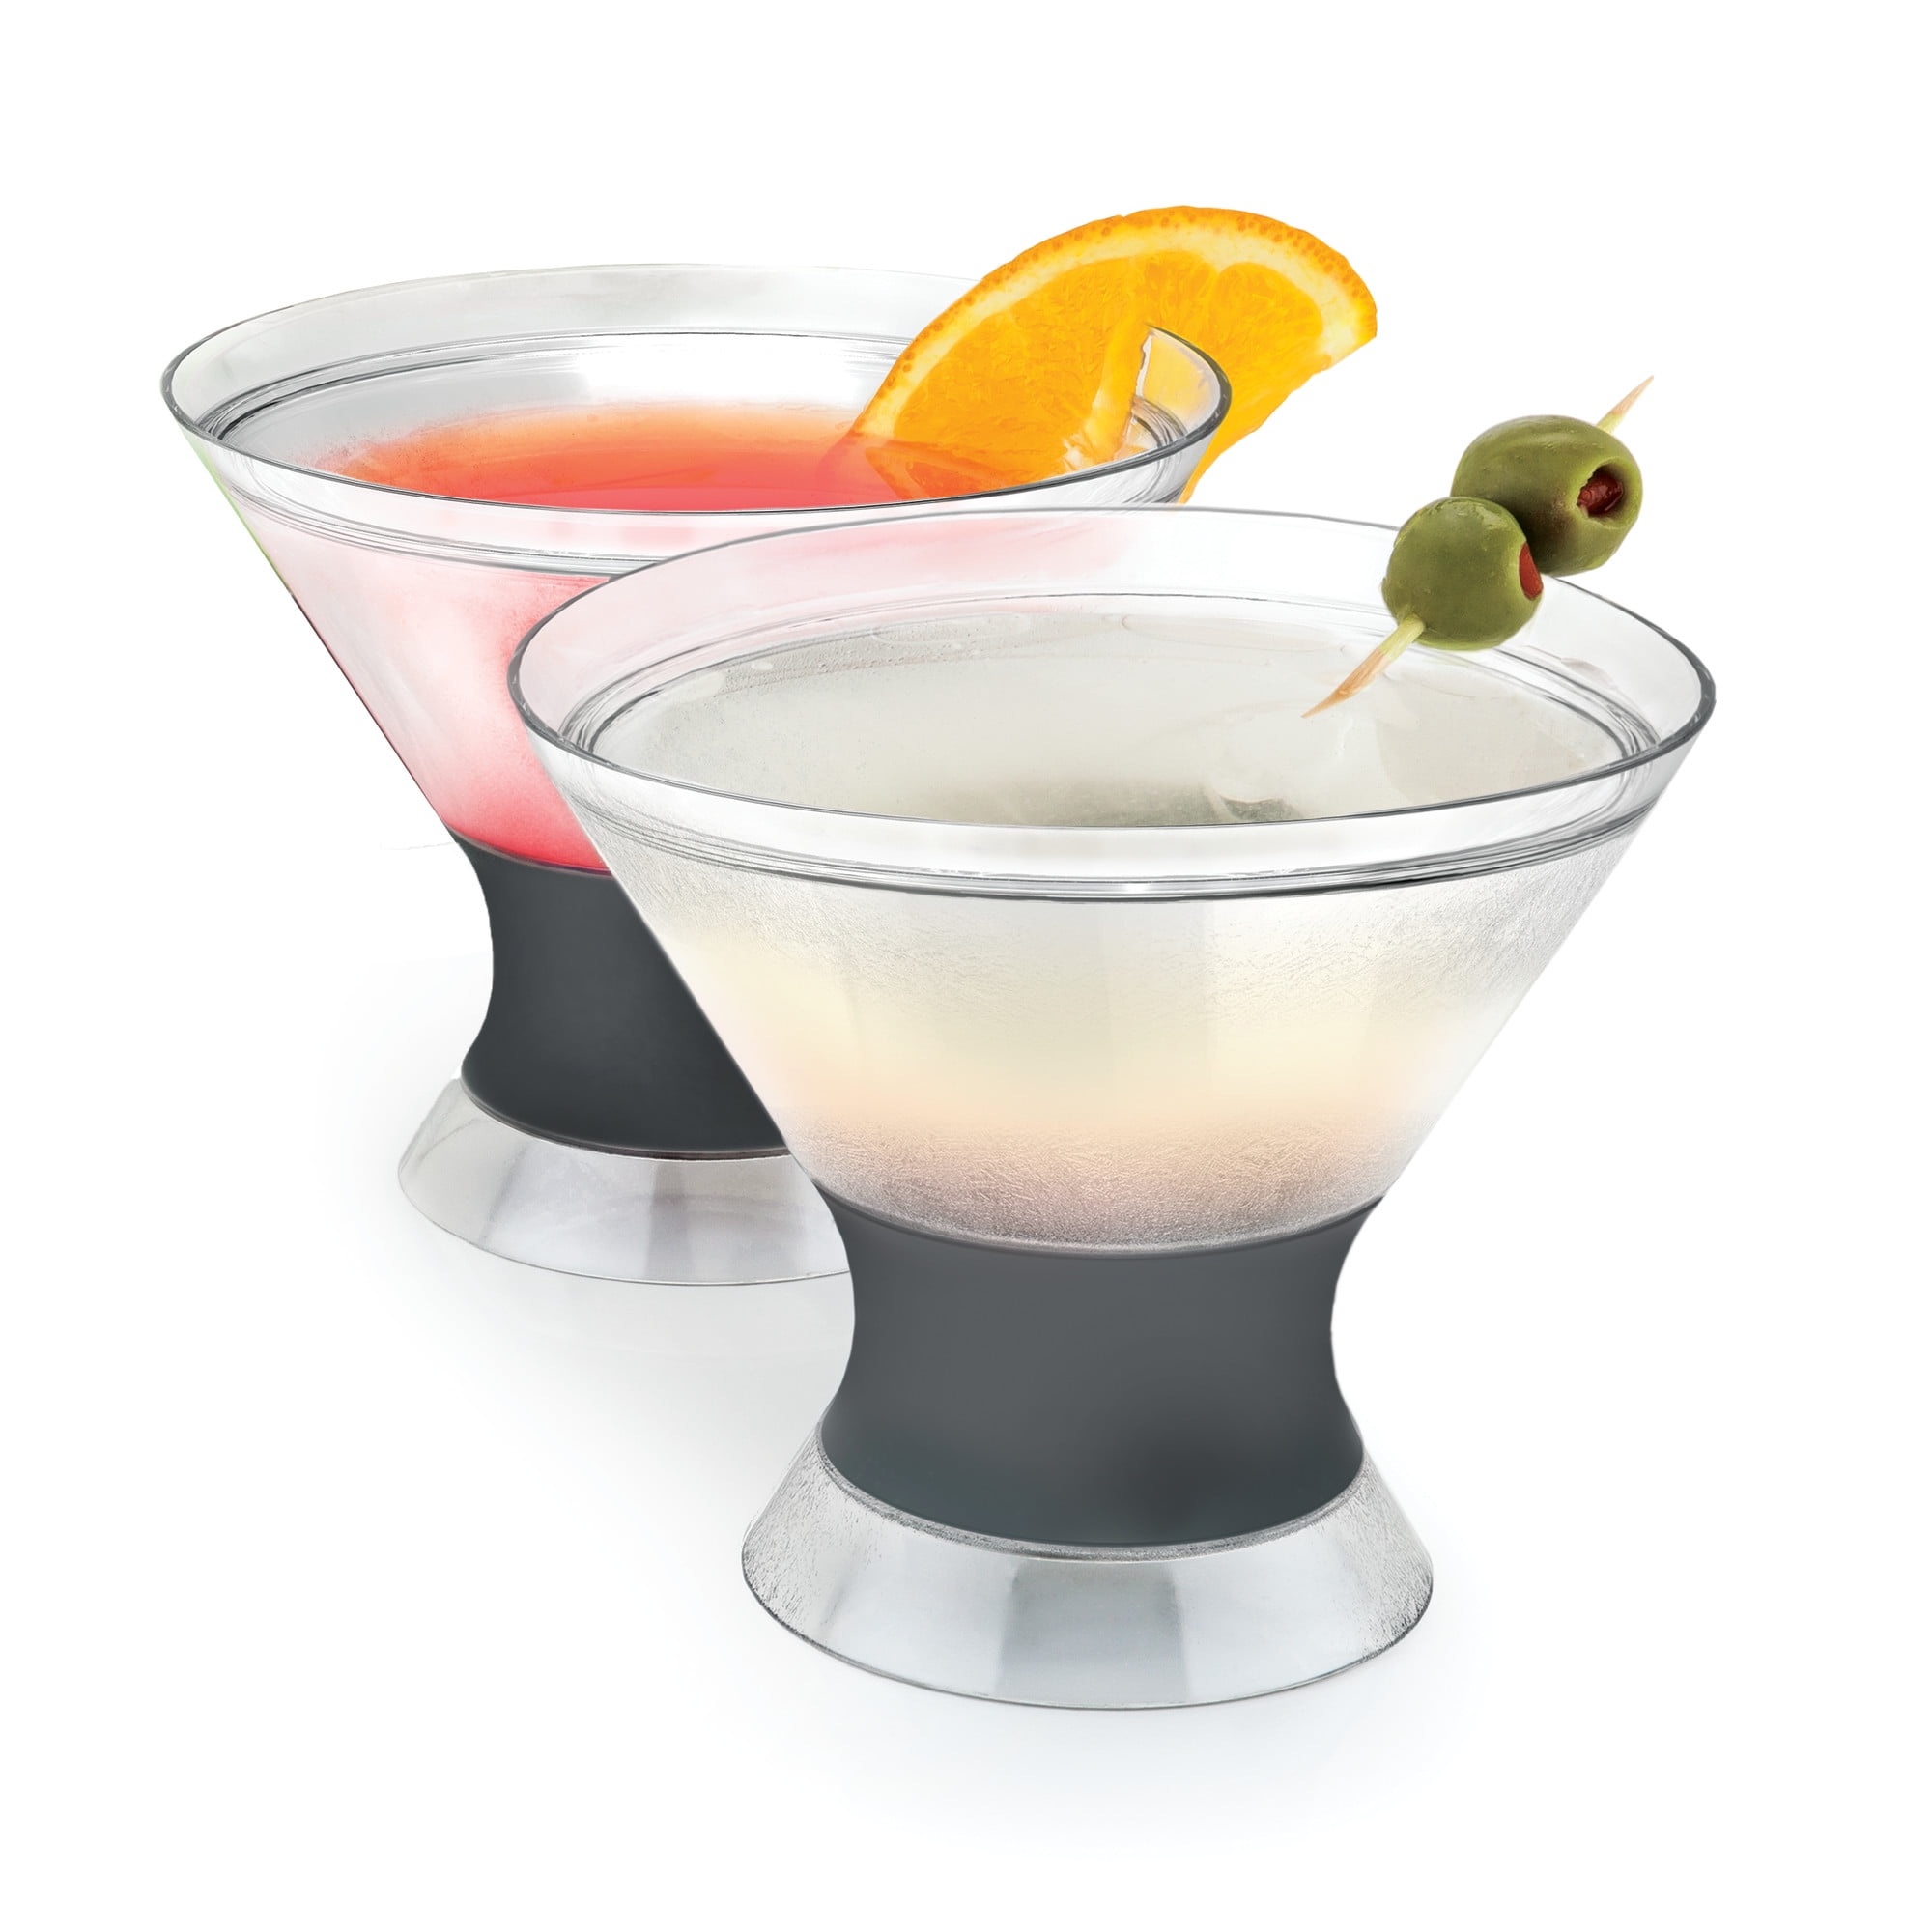 Host Freeze Double Wall Insulated Martini Plastic Cooling Cups